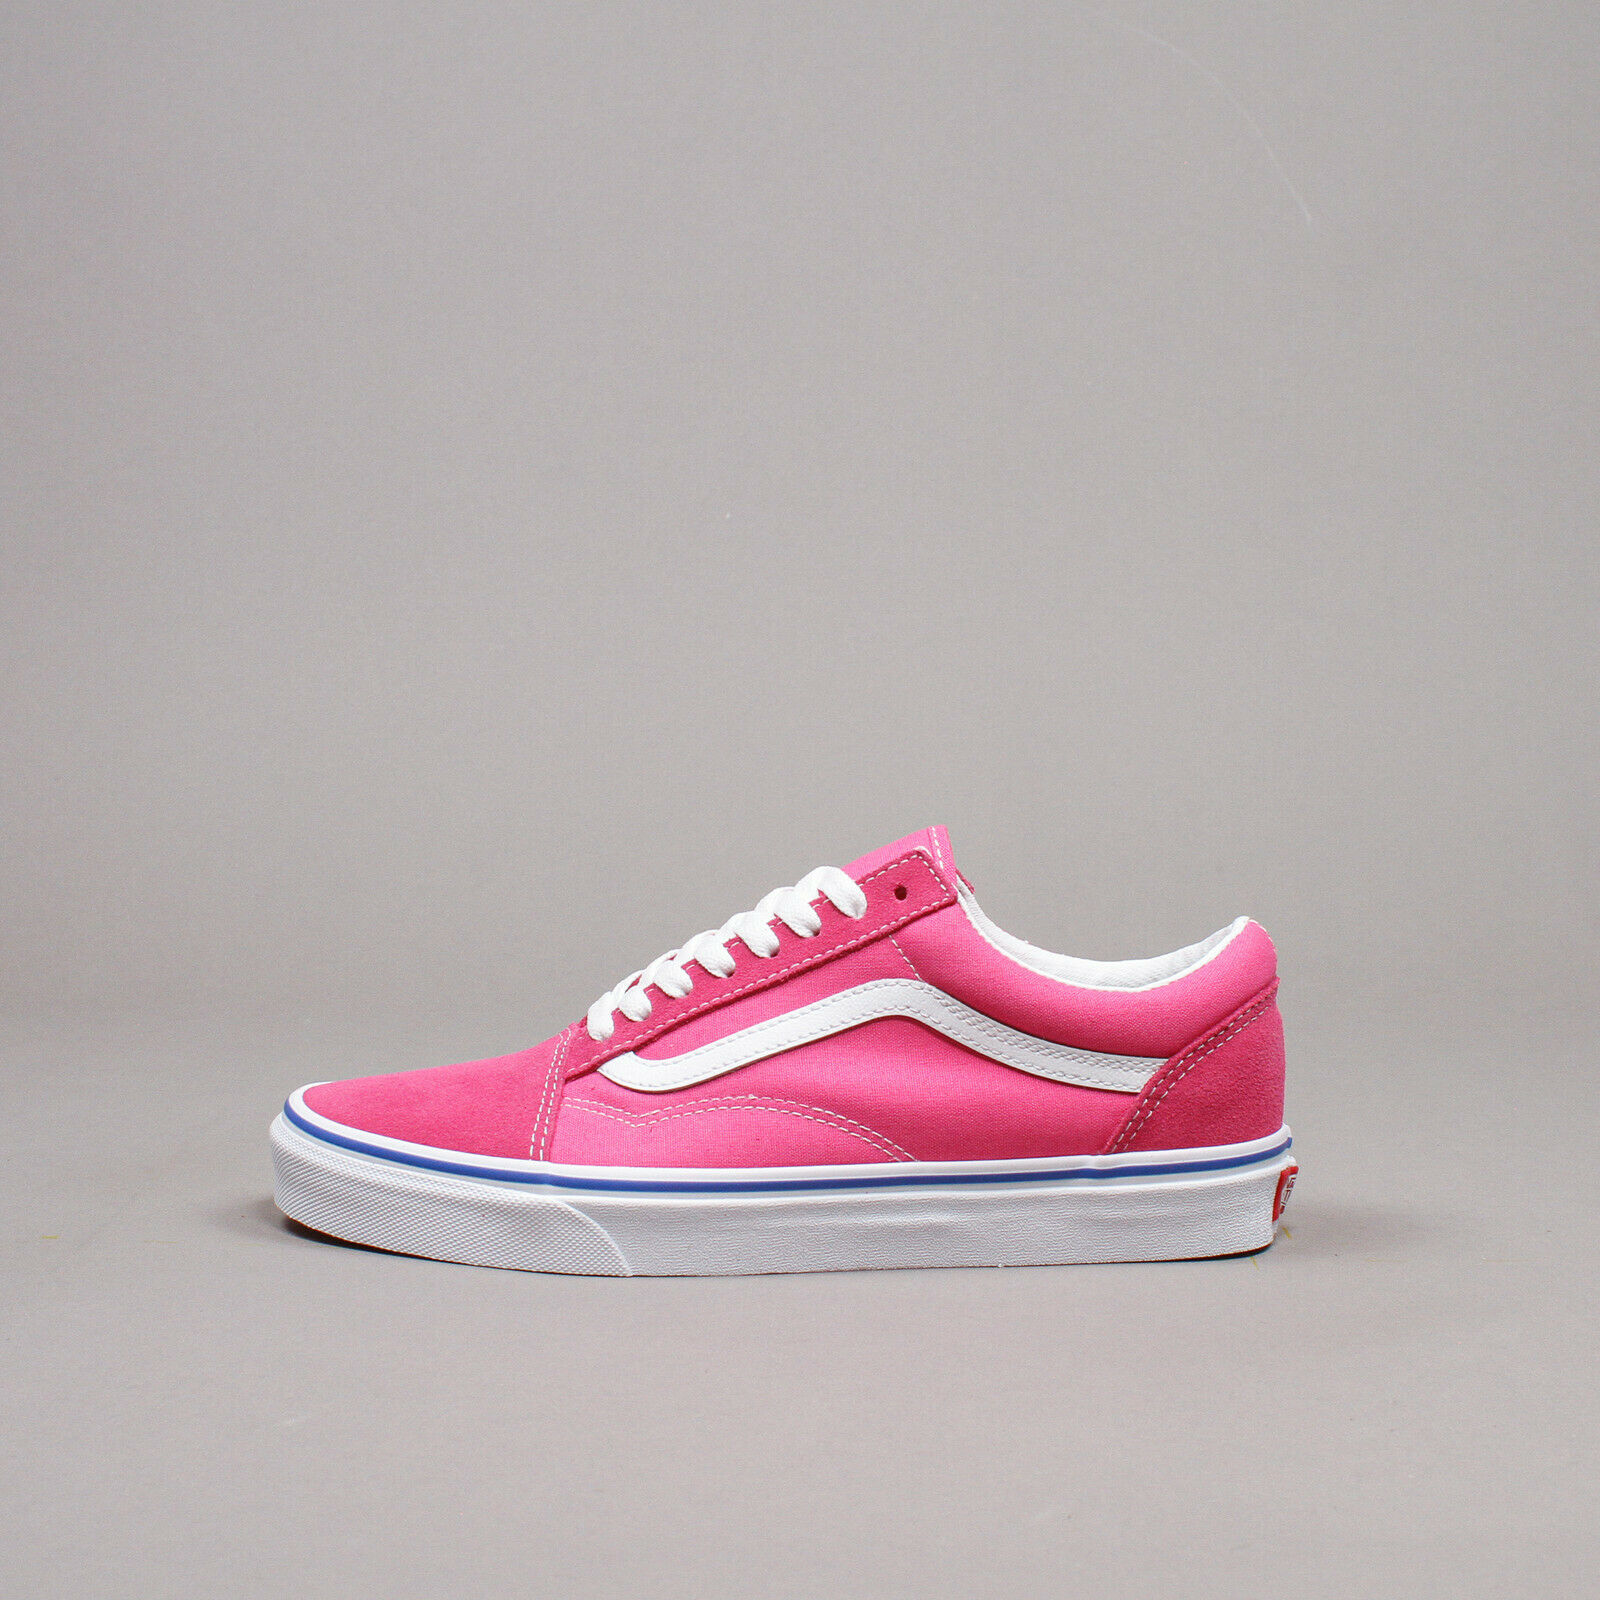 blue and grey or pink and white vans